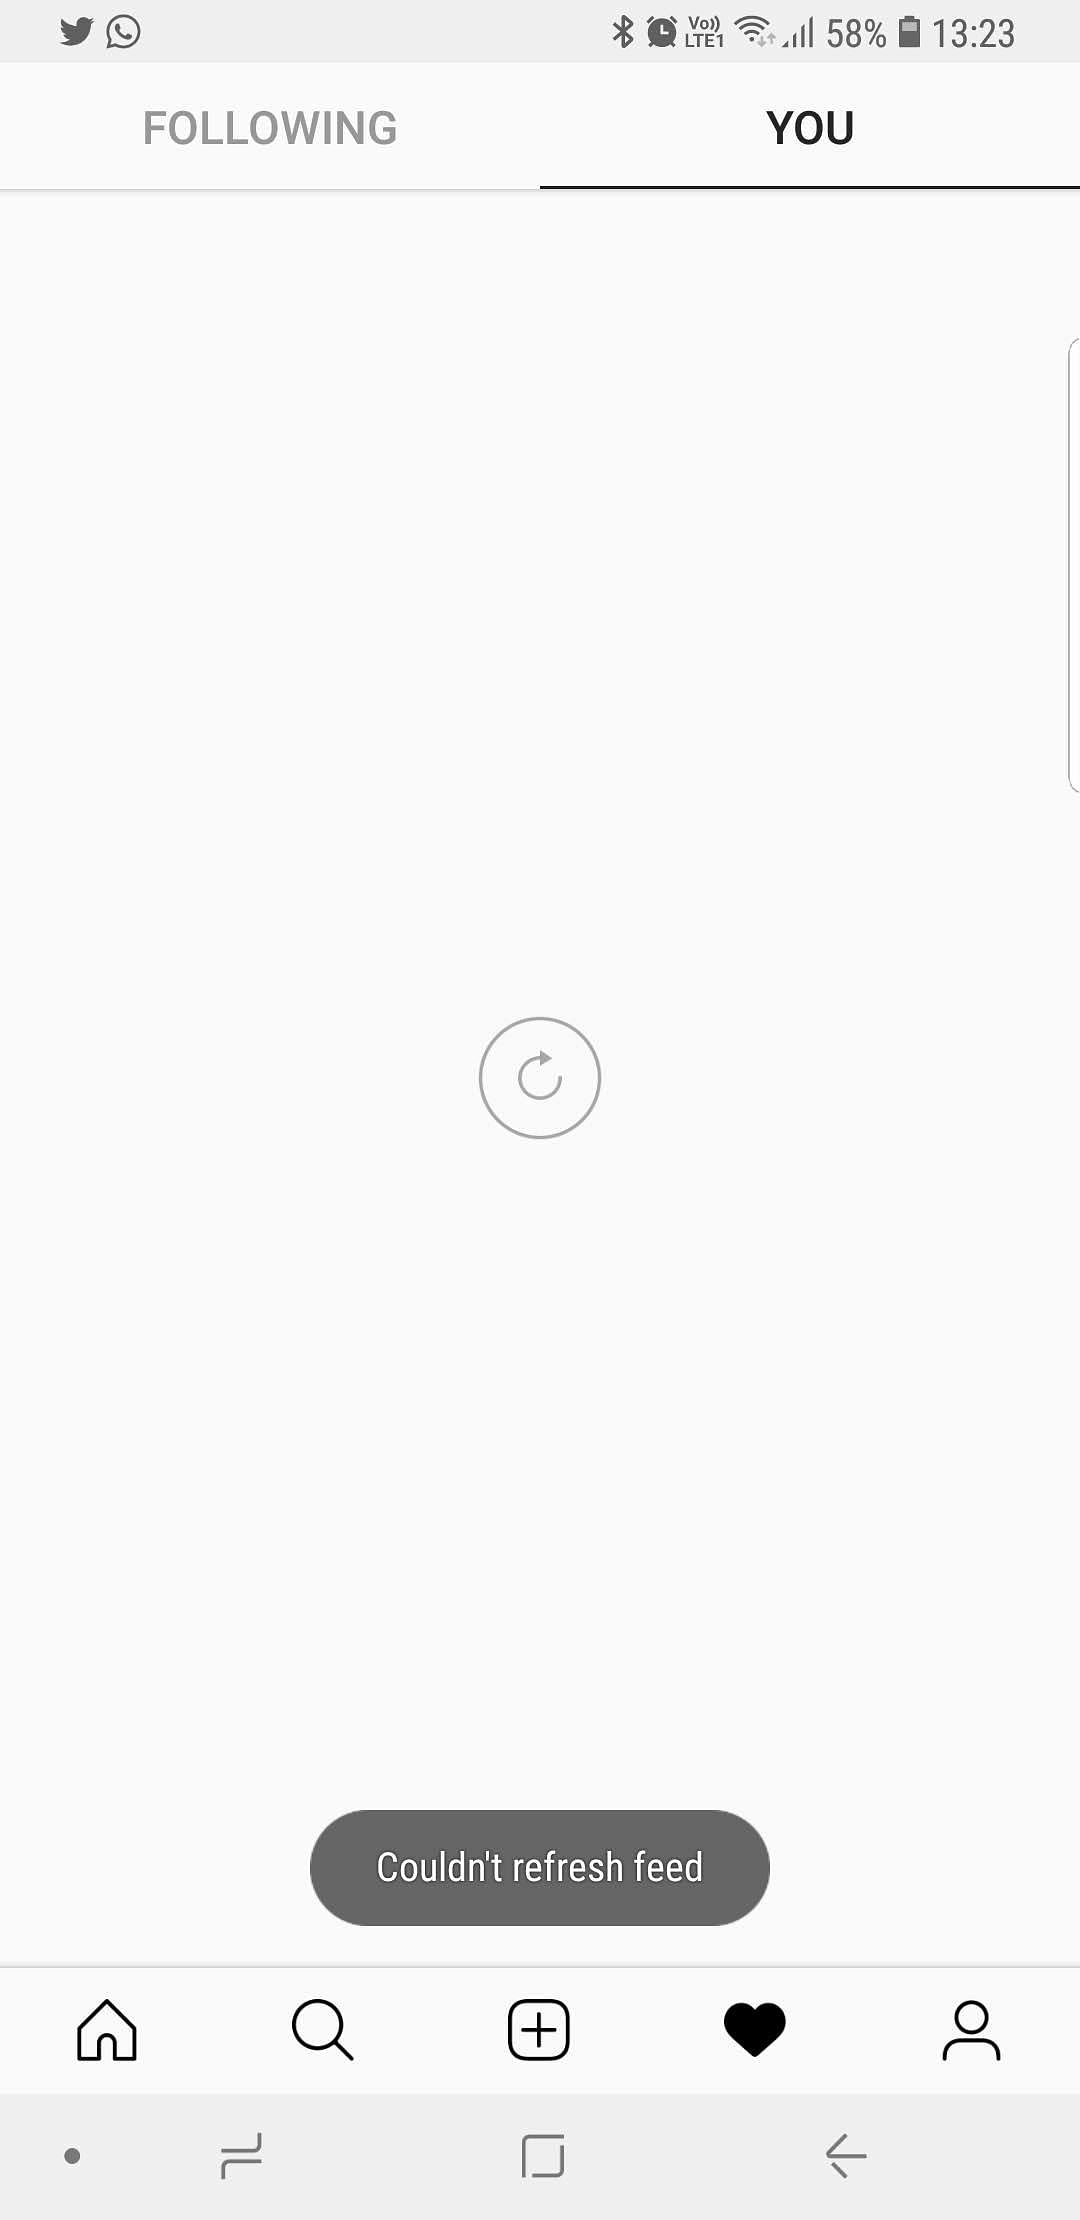 Instagram down for many users in India. Countries like US, Australia and European Union most affected.